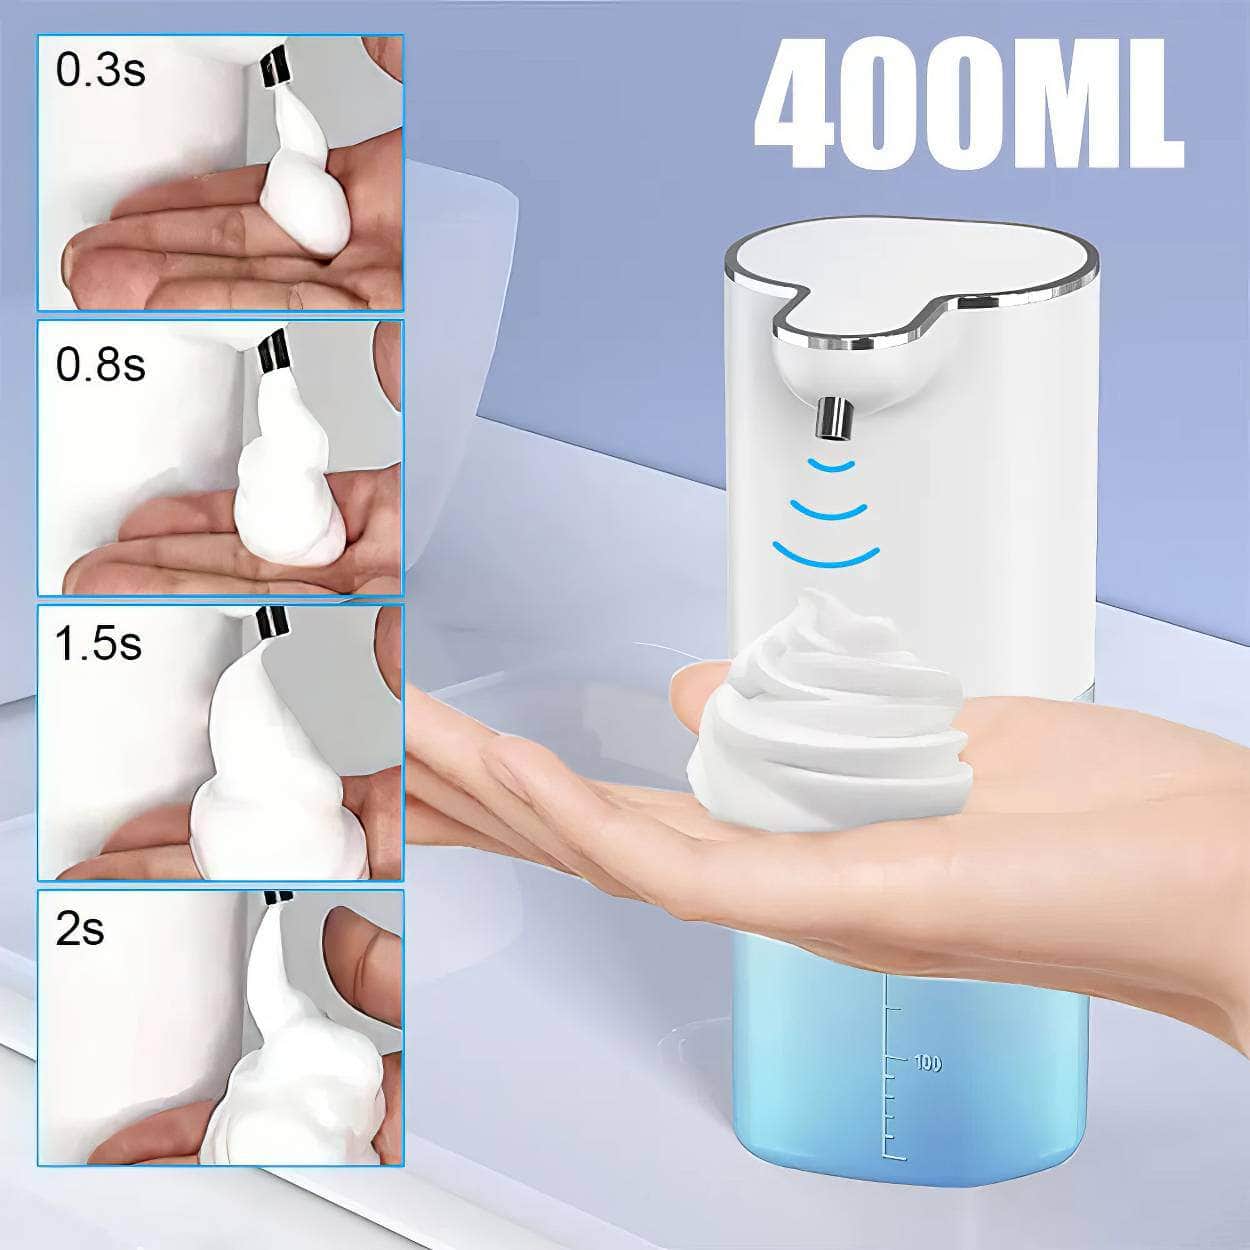 Touchless Automatic Soap Dispenser - Sensor Foam, Type-C Charging, High Capacity, Smart Liquid Soap with Adjustable Switch